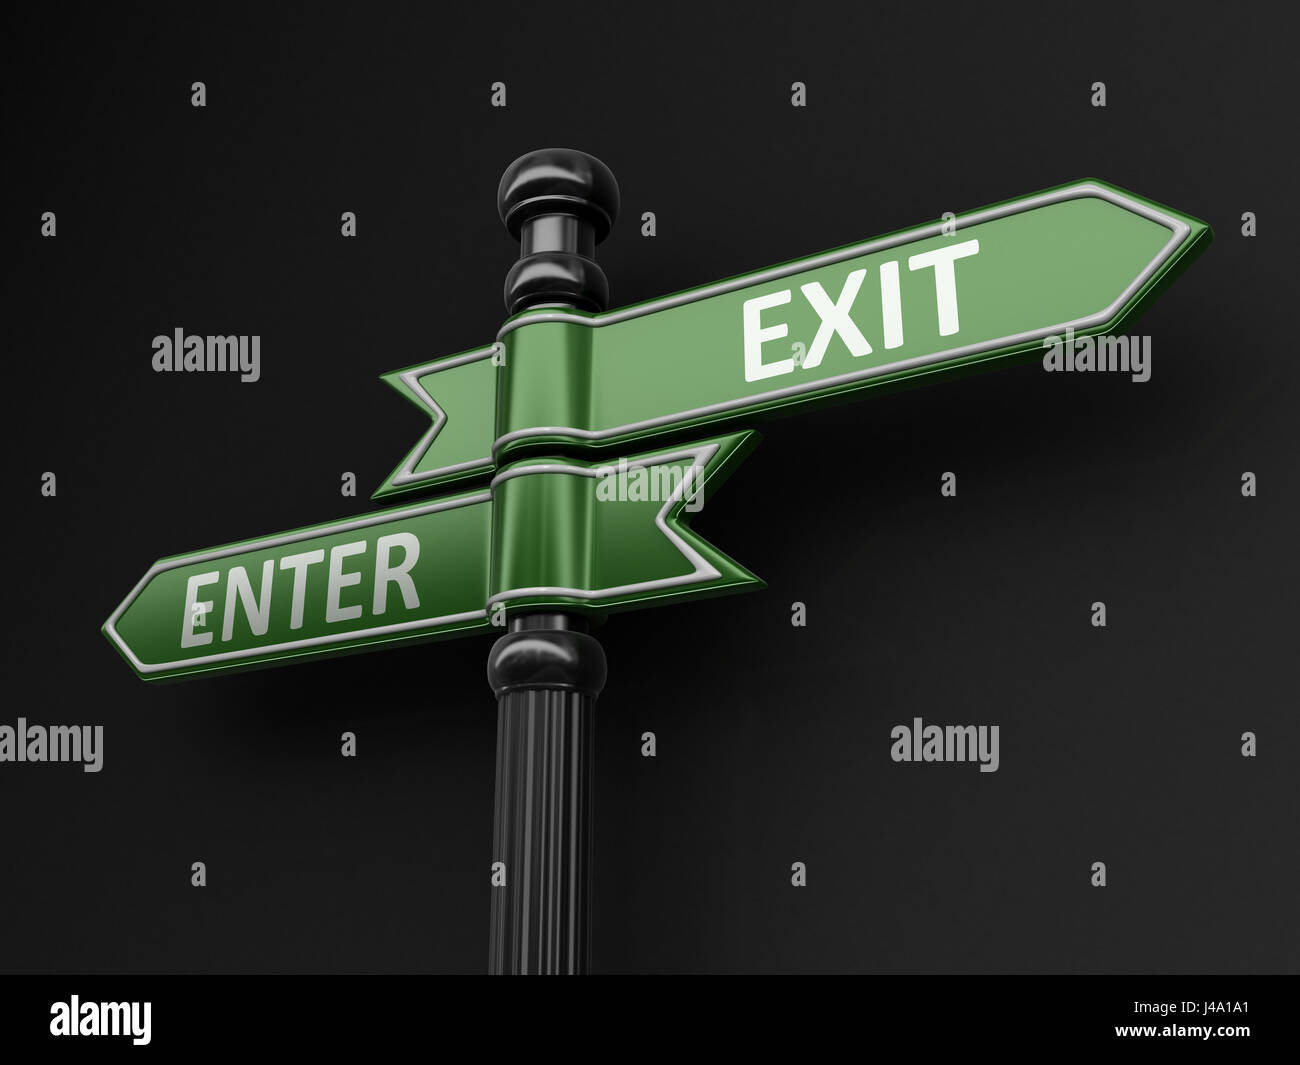 Enter and exit pointers on signpost. Image with clipping path Stock Photo